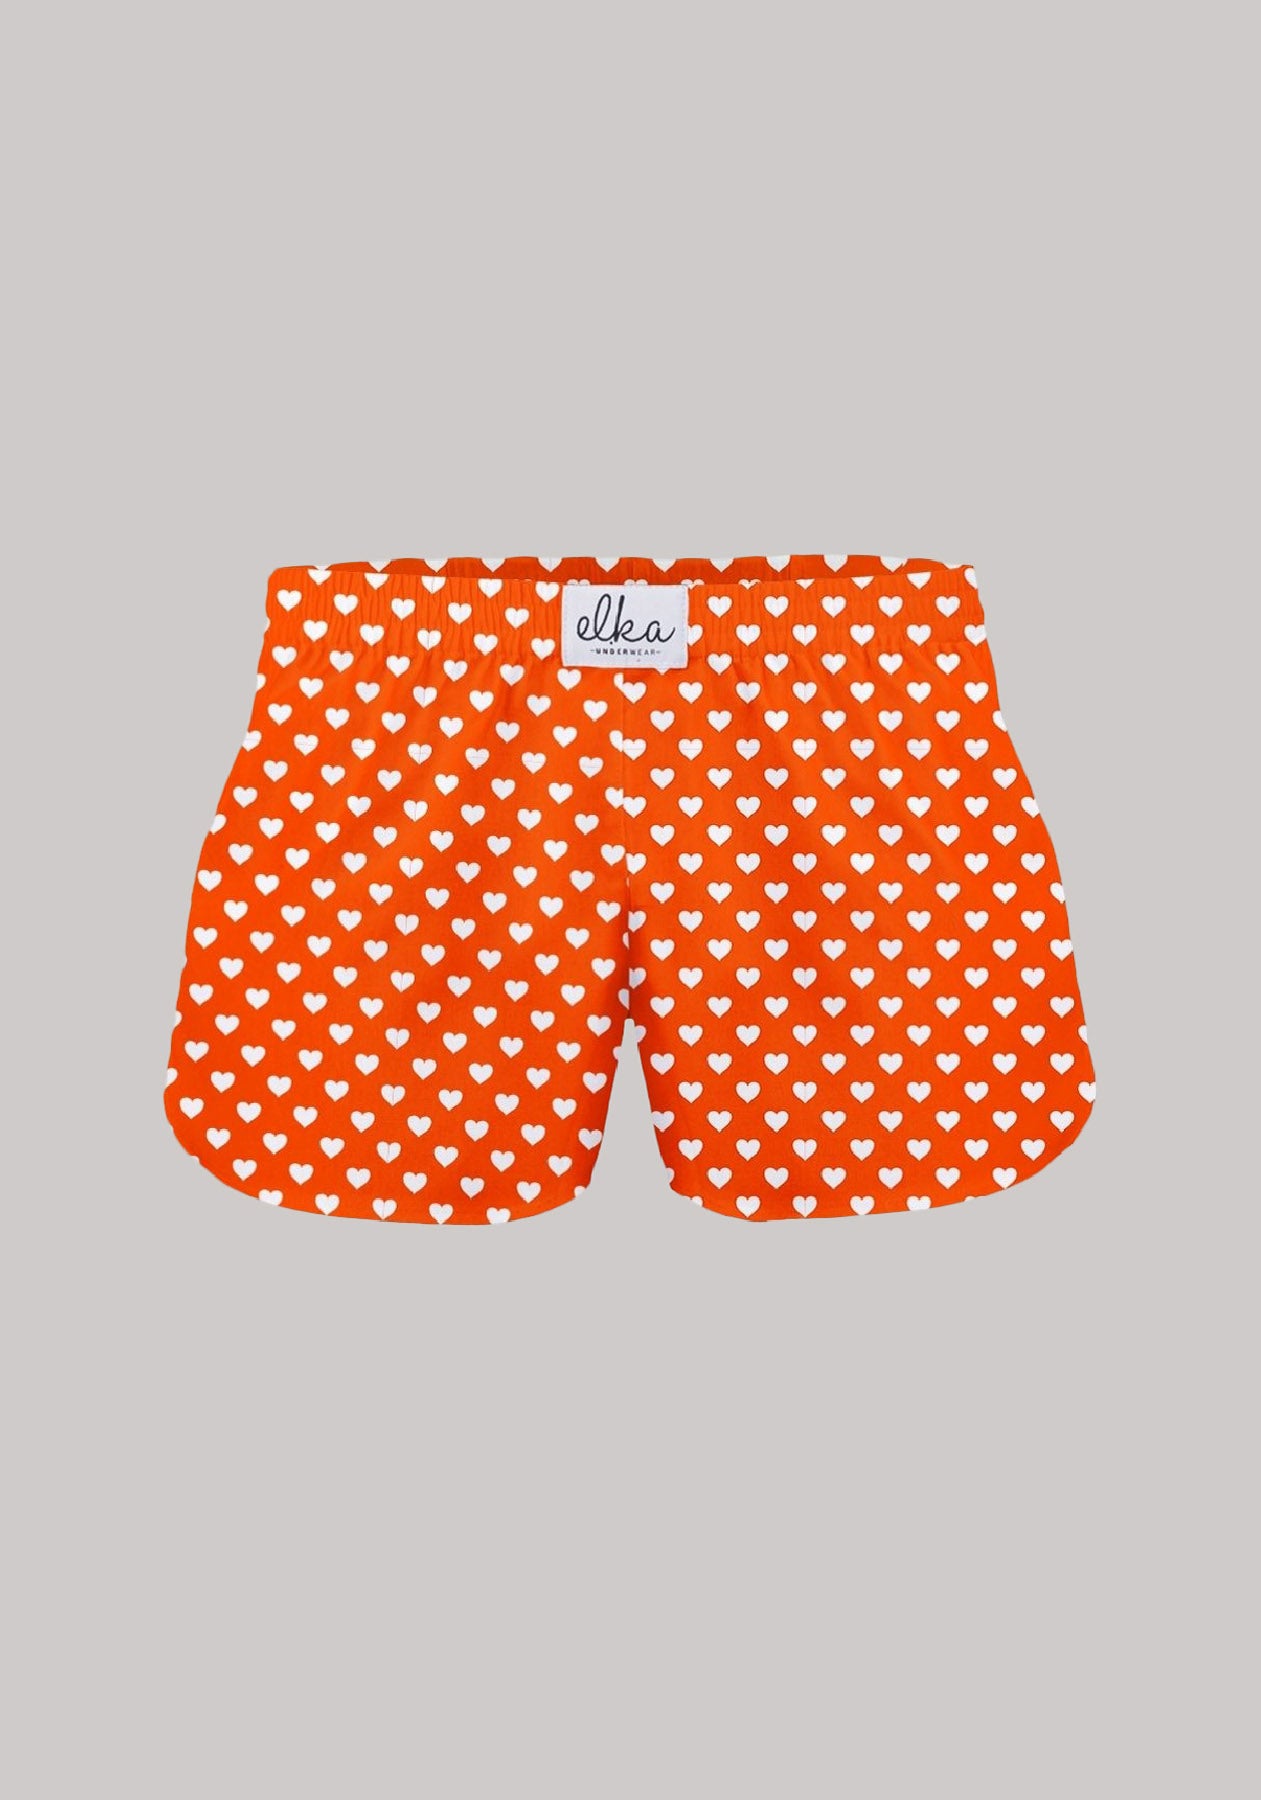 Women's shorts Brown with polka dots